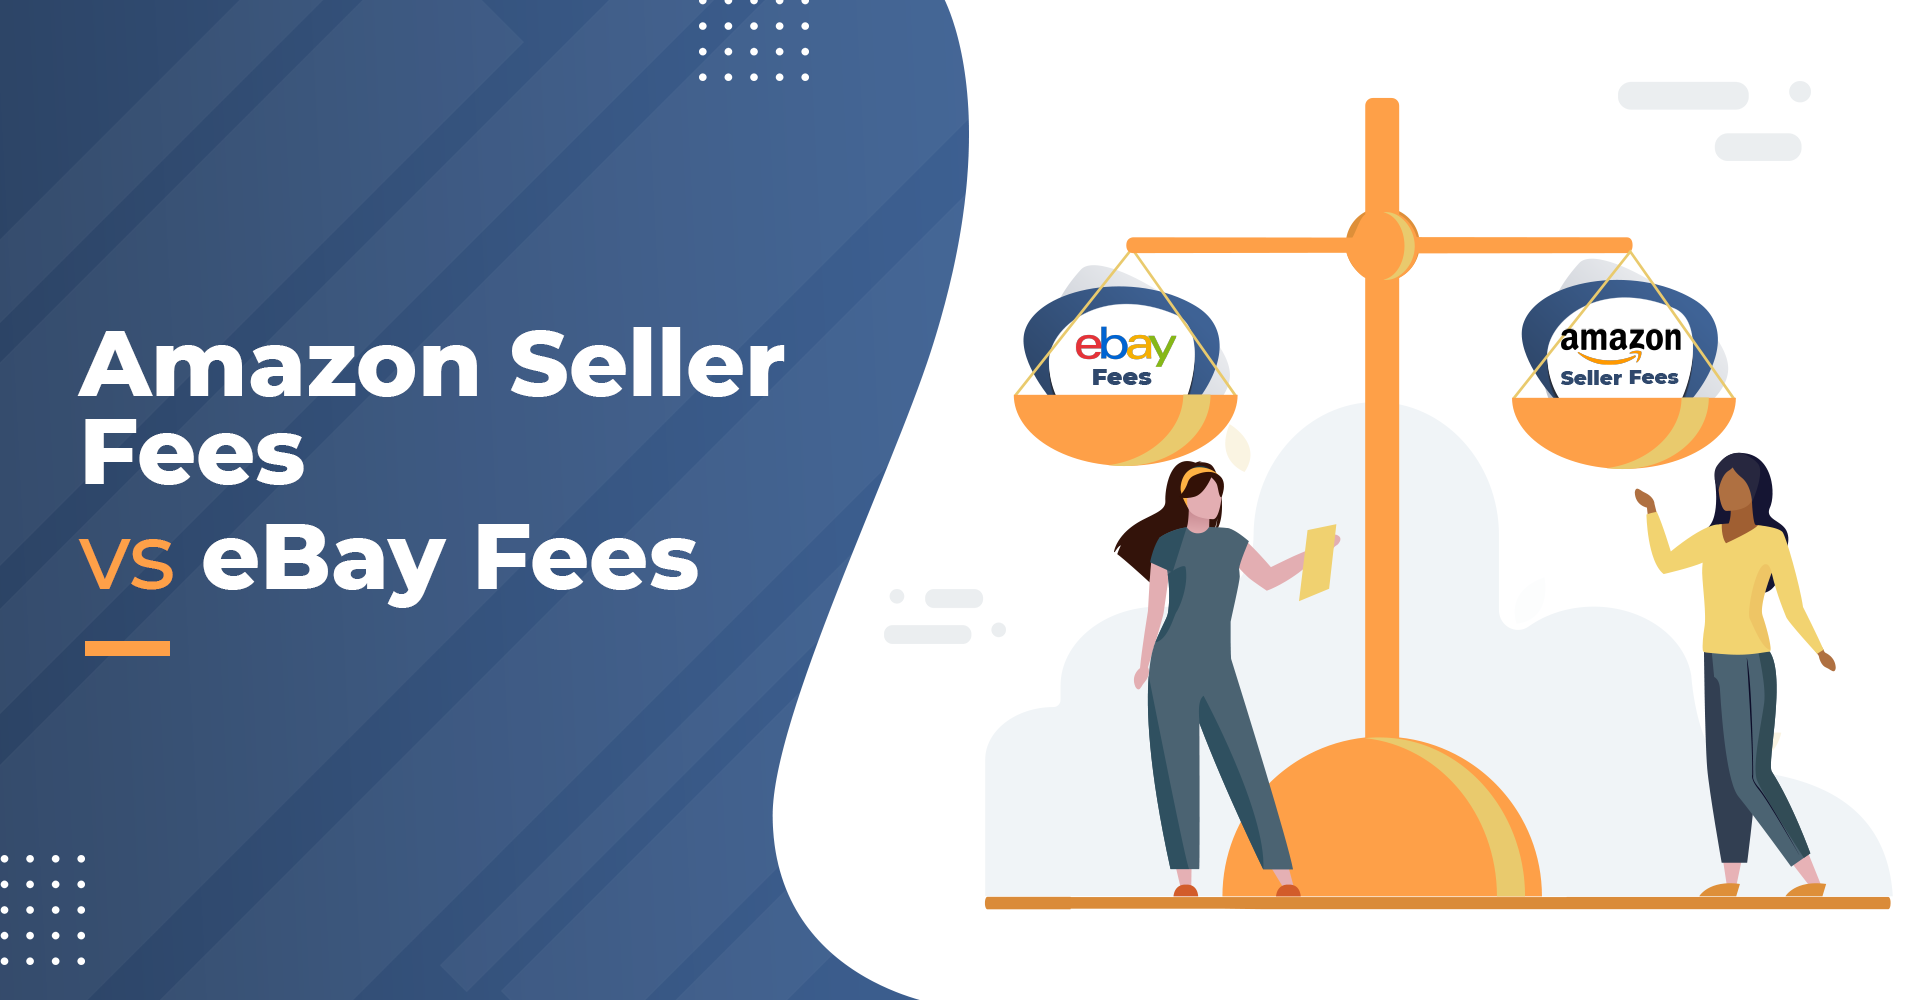 Amazon seller fees compared to eBay fees